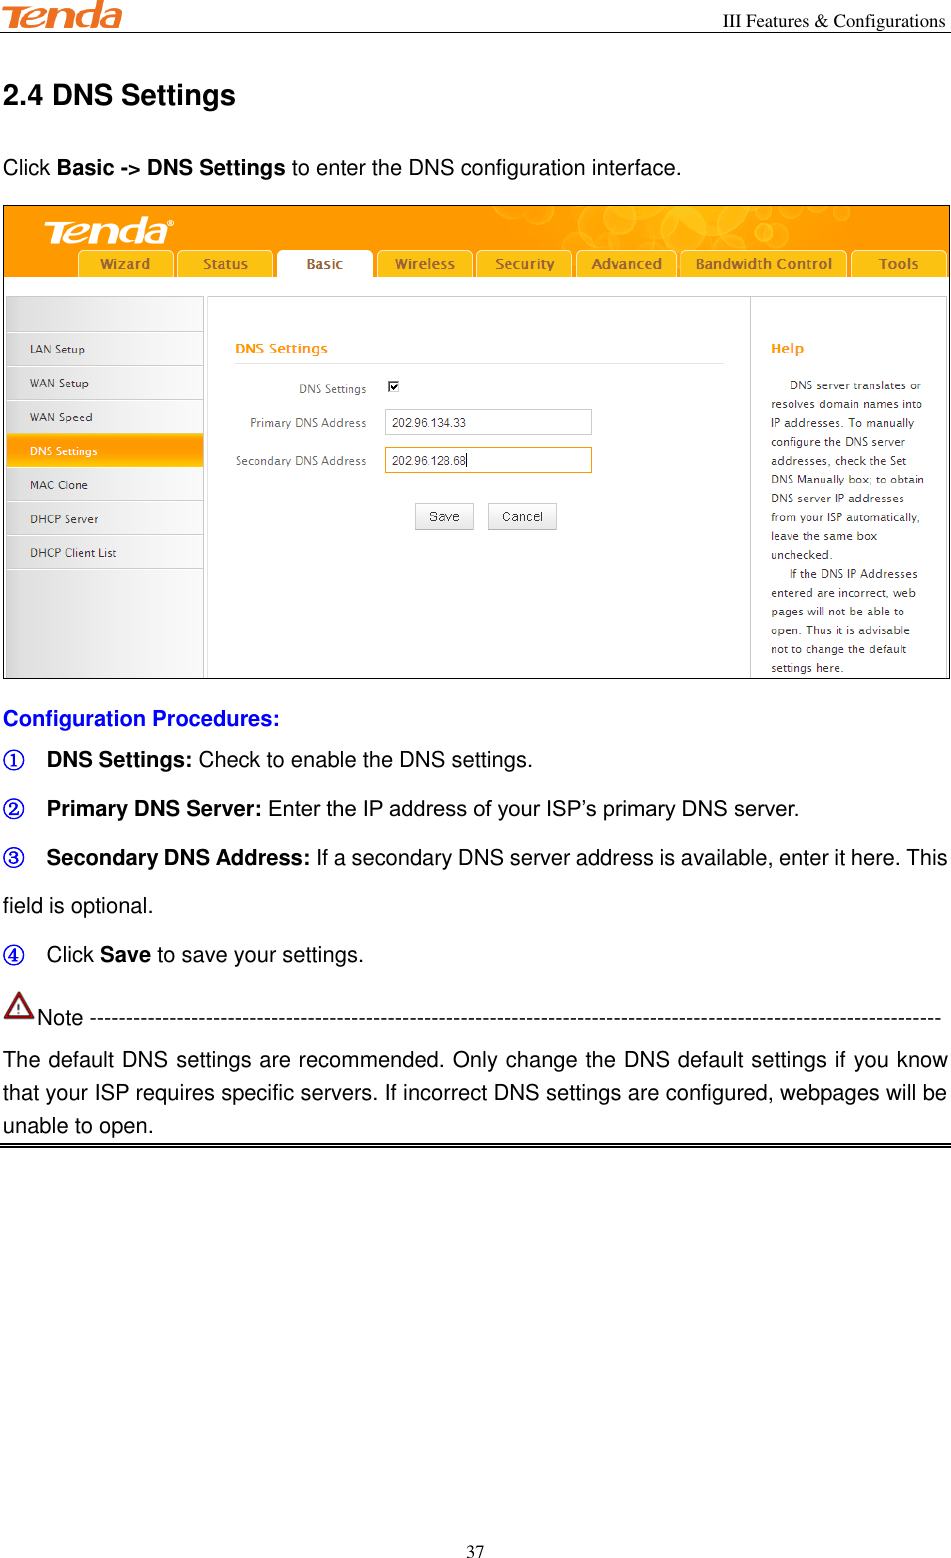                                                        III Features &amp; Configurations           37 2.4 DNS Settings Click Basic -&gt; DNS Settings to enter the DNS configuration interface.  Configuration Procedures: ① DNS Settings: Check to enable the DNS settings. ② Primary DNS Server: Enter the IP address of your ISP’s primary DNS server. ③ Secondary DNS Address: If a secondary DNS server address is available, enter it here. This field is optional. ④ Click Save to save your settings. Note --------------------------------------------------------------------------------------------------------------------- The default DNS settings are recommended. Only change the DNS default settings if you know that your ISP requires specific servers. If incorrect DNS settings are configured, webpages will be unable to open. 